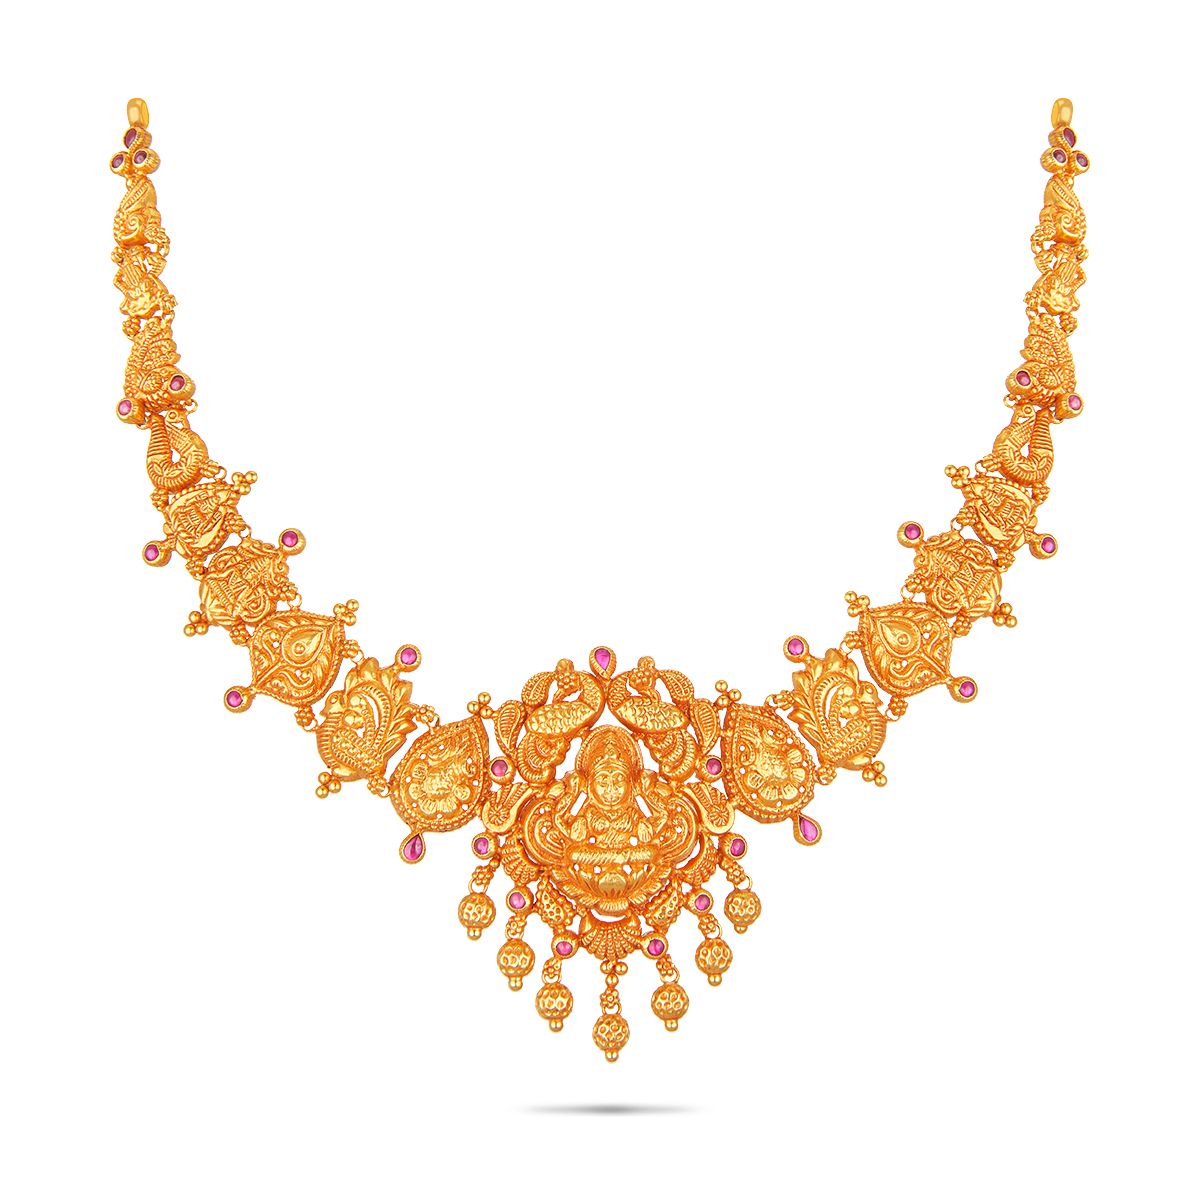 Stunning Temple Gold Necklace